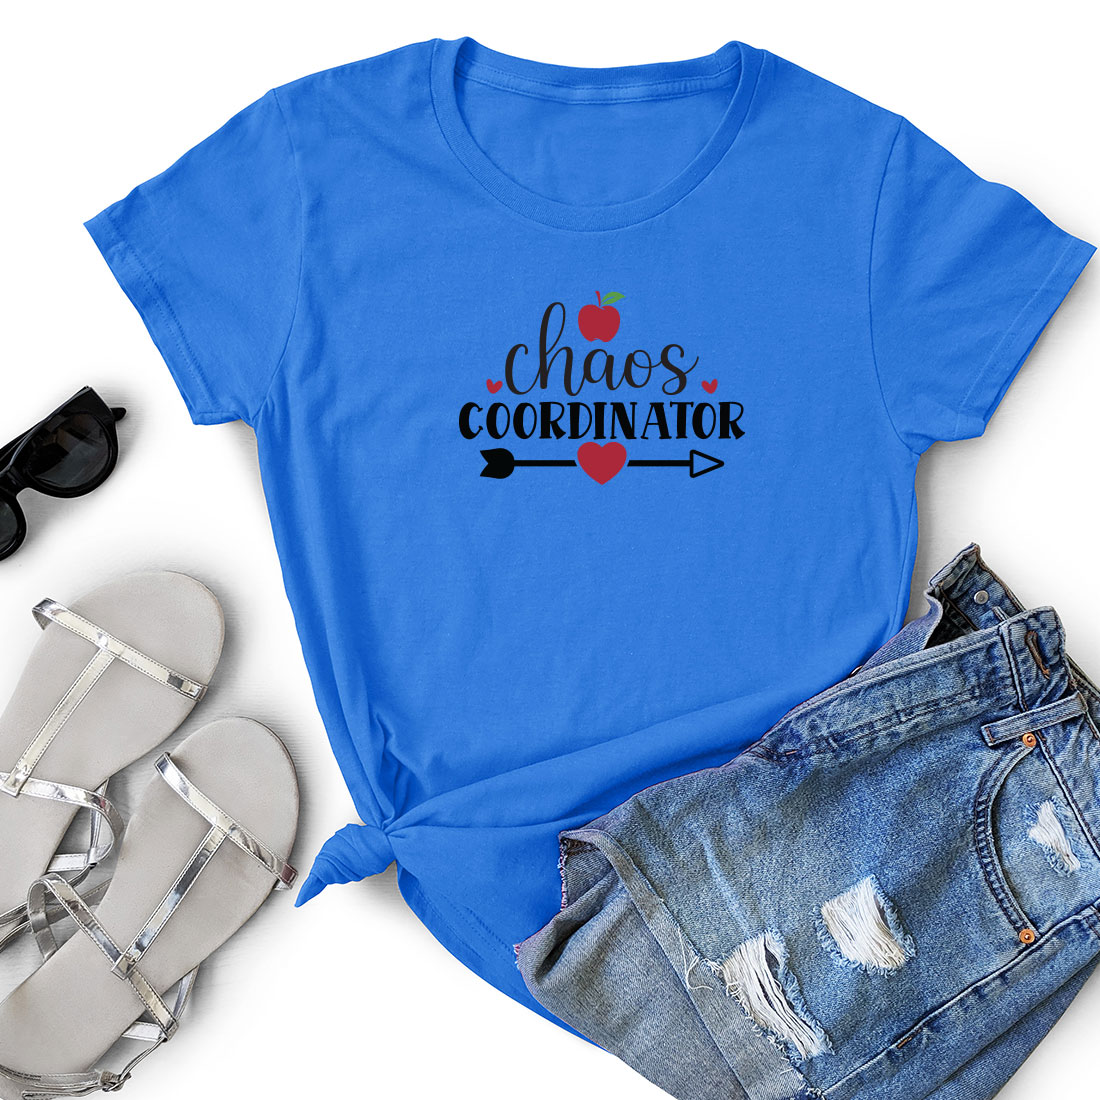 T - shirt that says chaos cookinator next to a pair of shorts.